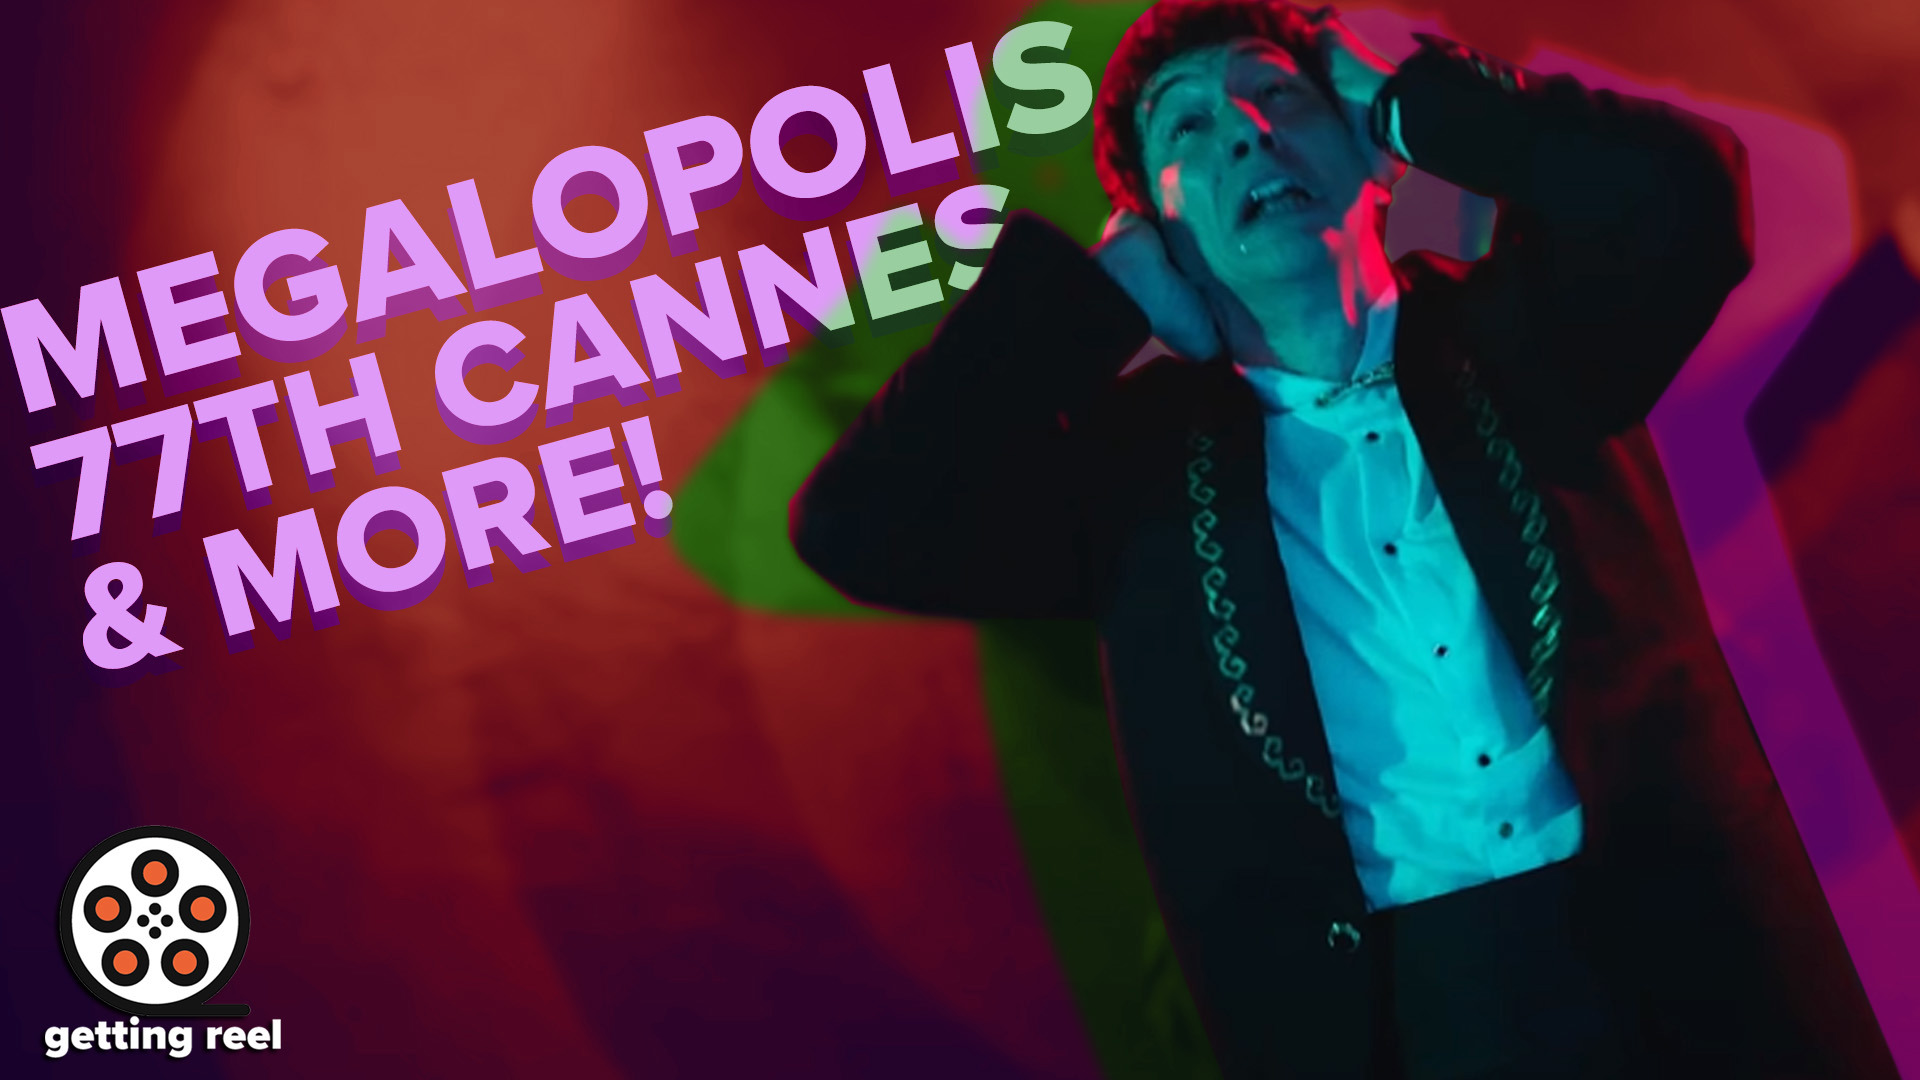 We preview the 77th Cannes Film Festival which is premiering Francis Ford Coppola's Megalopolis and more!